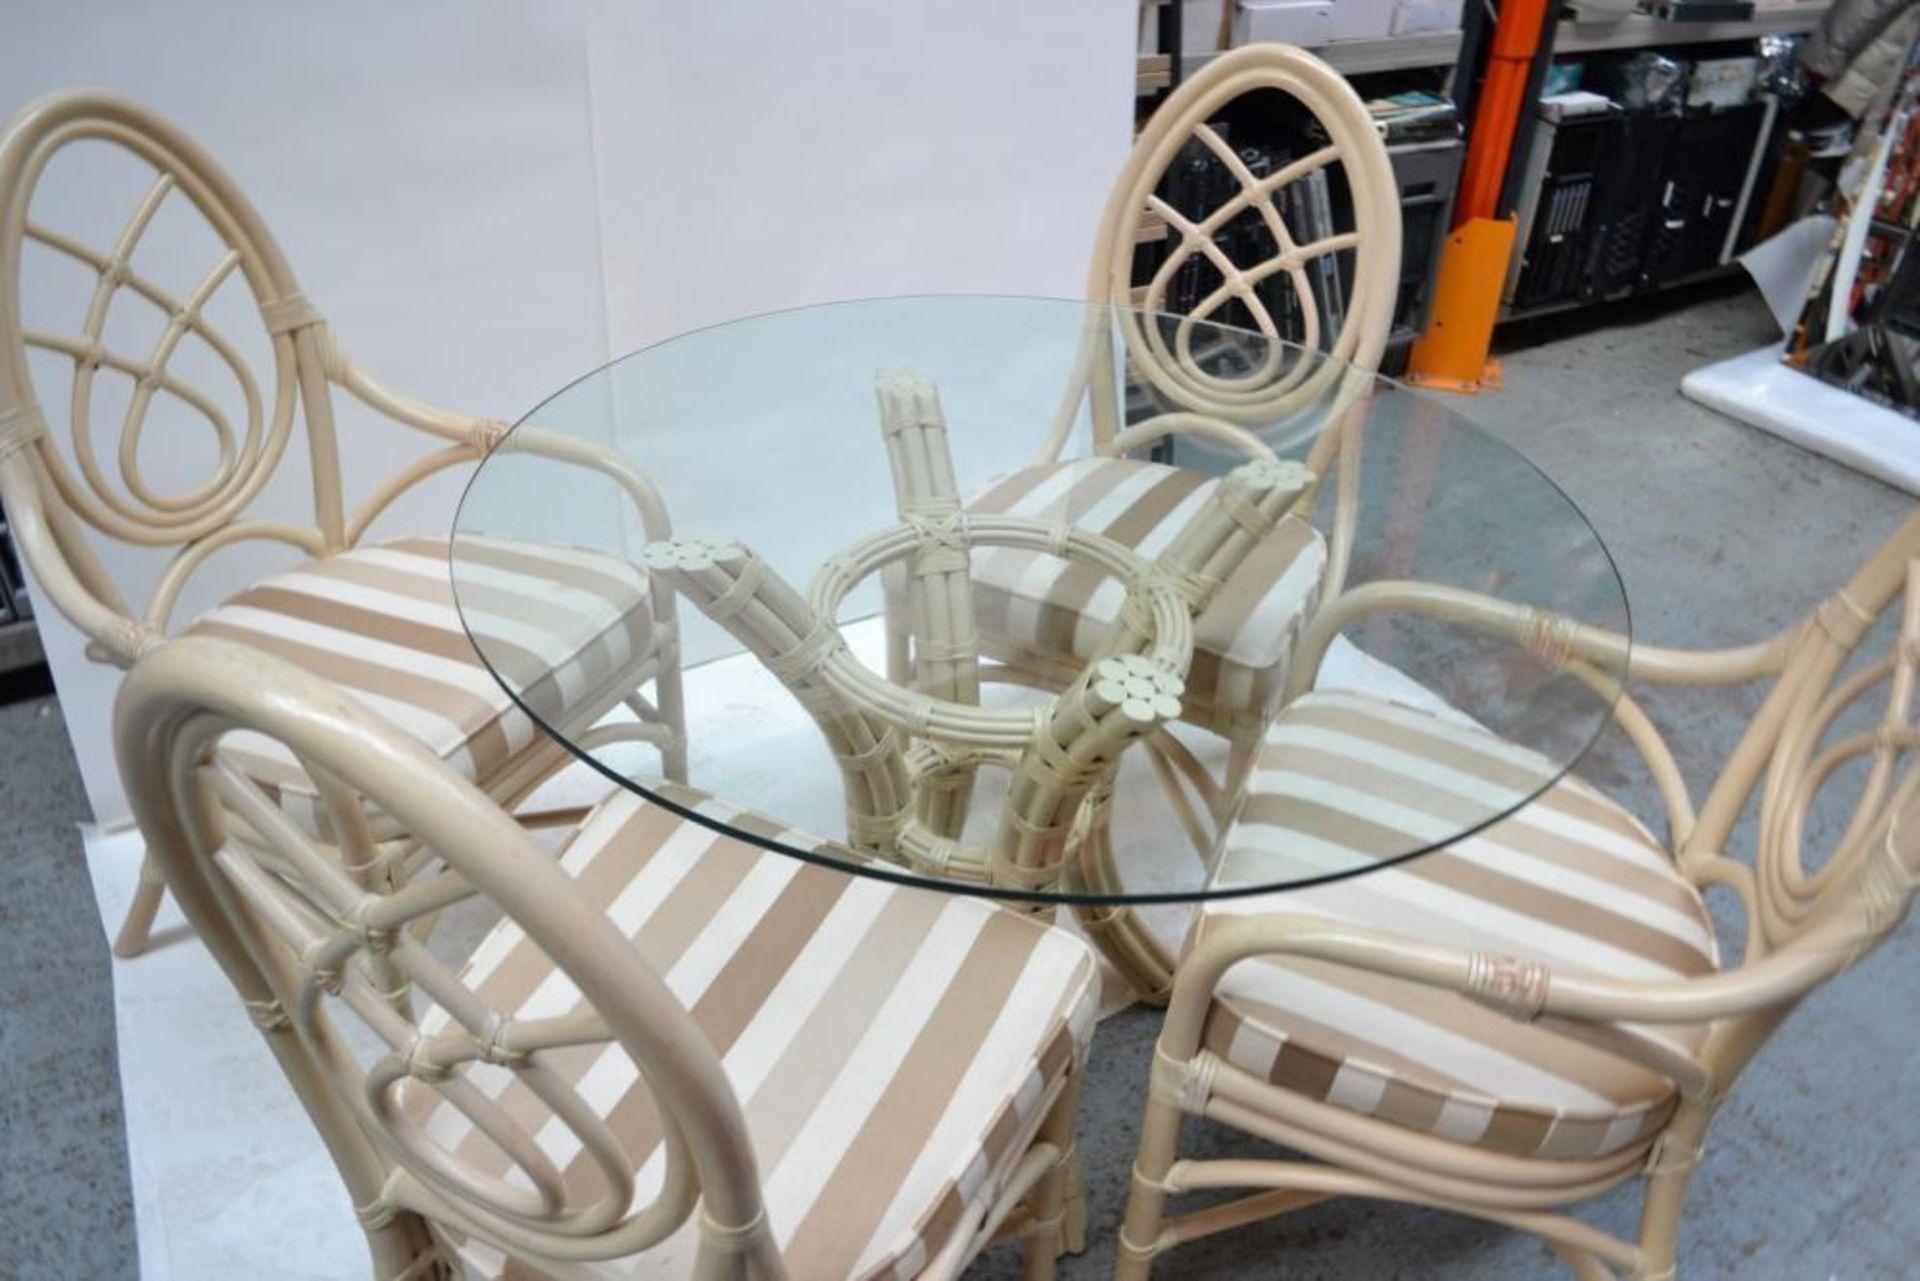 1 x Glass Topped Cane Table with 4 Chairs - Pre-owned In Good Condition - AE010 - CL007 - Location: - Image 7 of 13